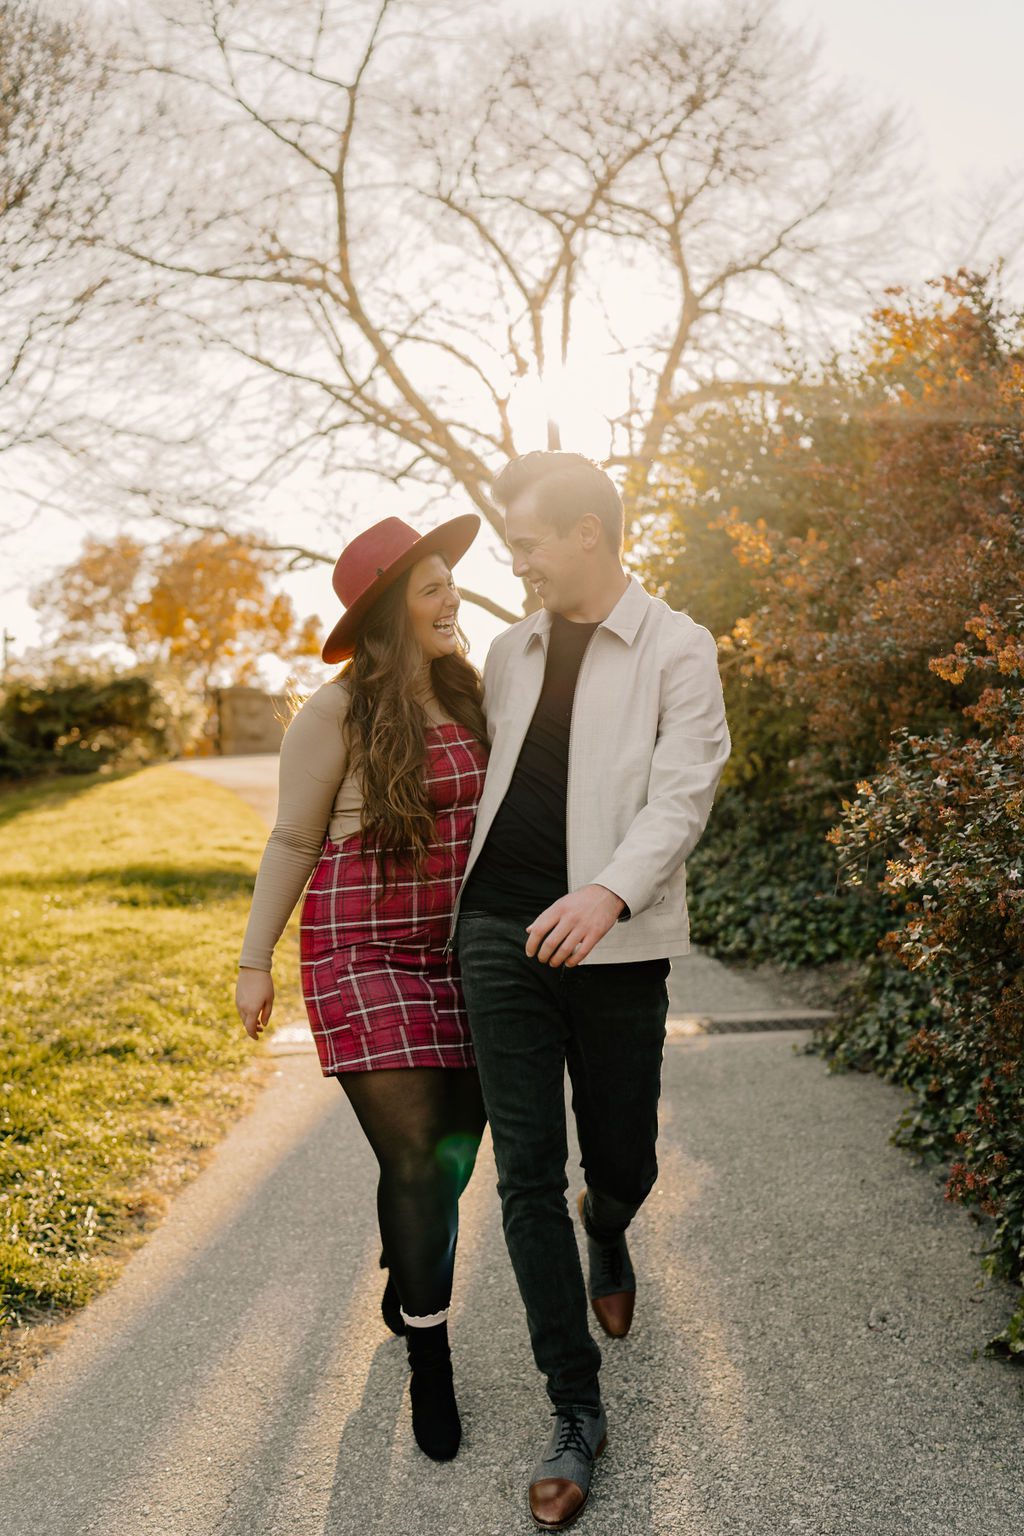 Fall Couples Pictures At The Biltmore Estate in Asheville, North Carolina